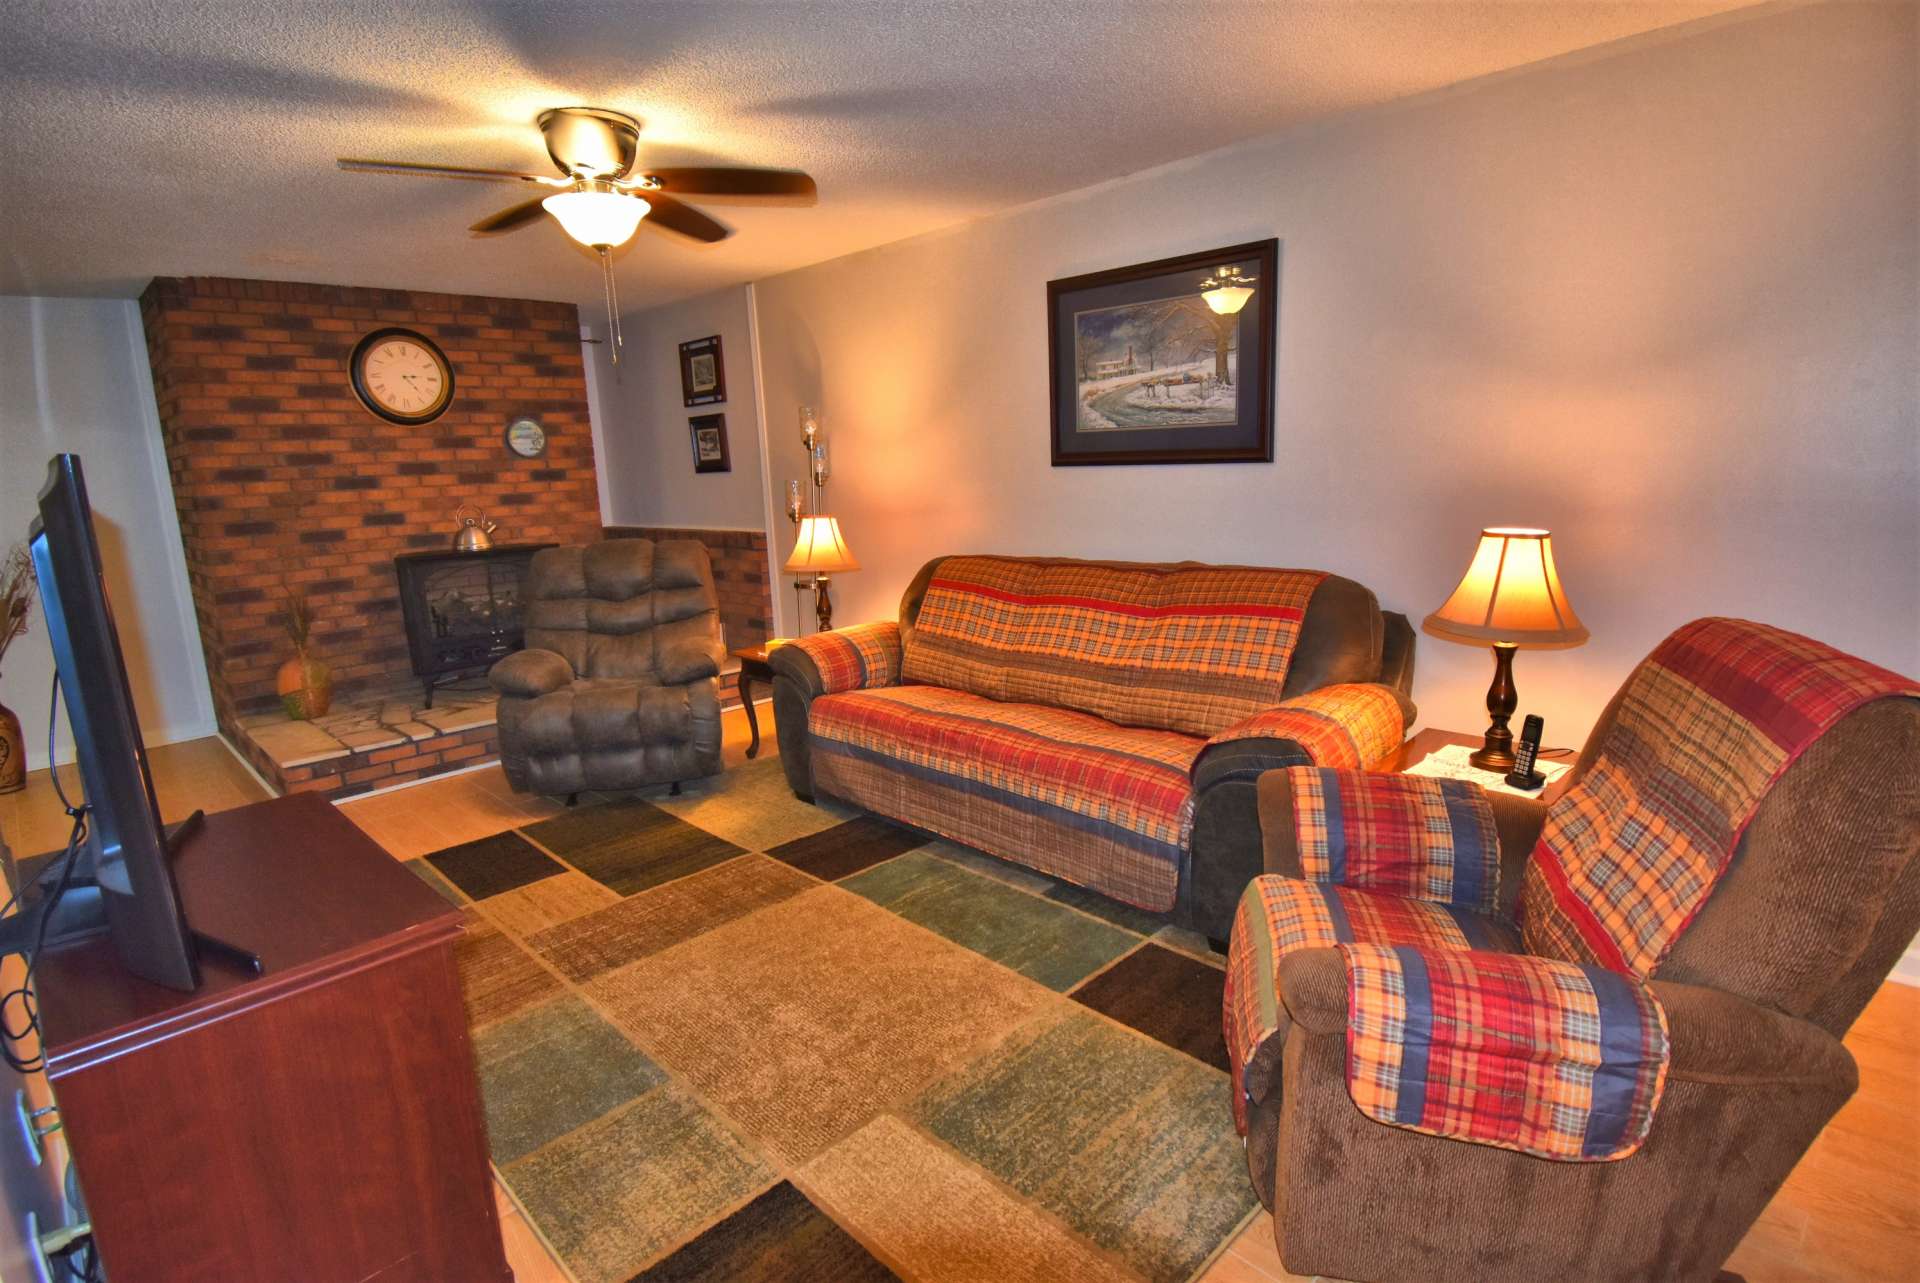 The lower level living area features new flooring and a gas log stove with the option of having a wood burning stove.